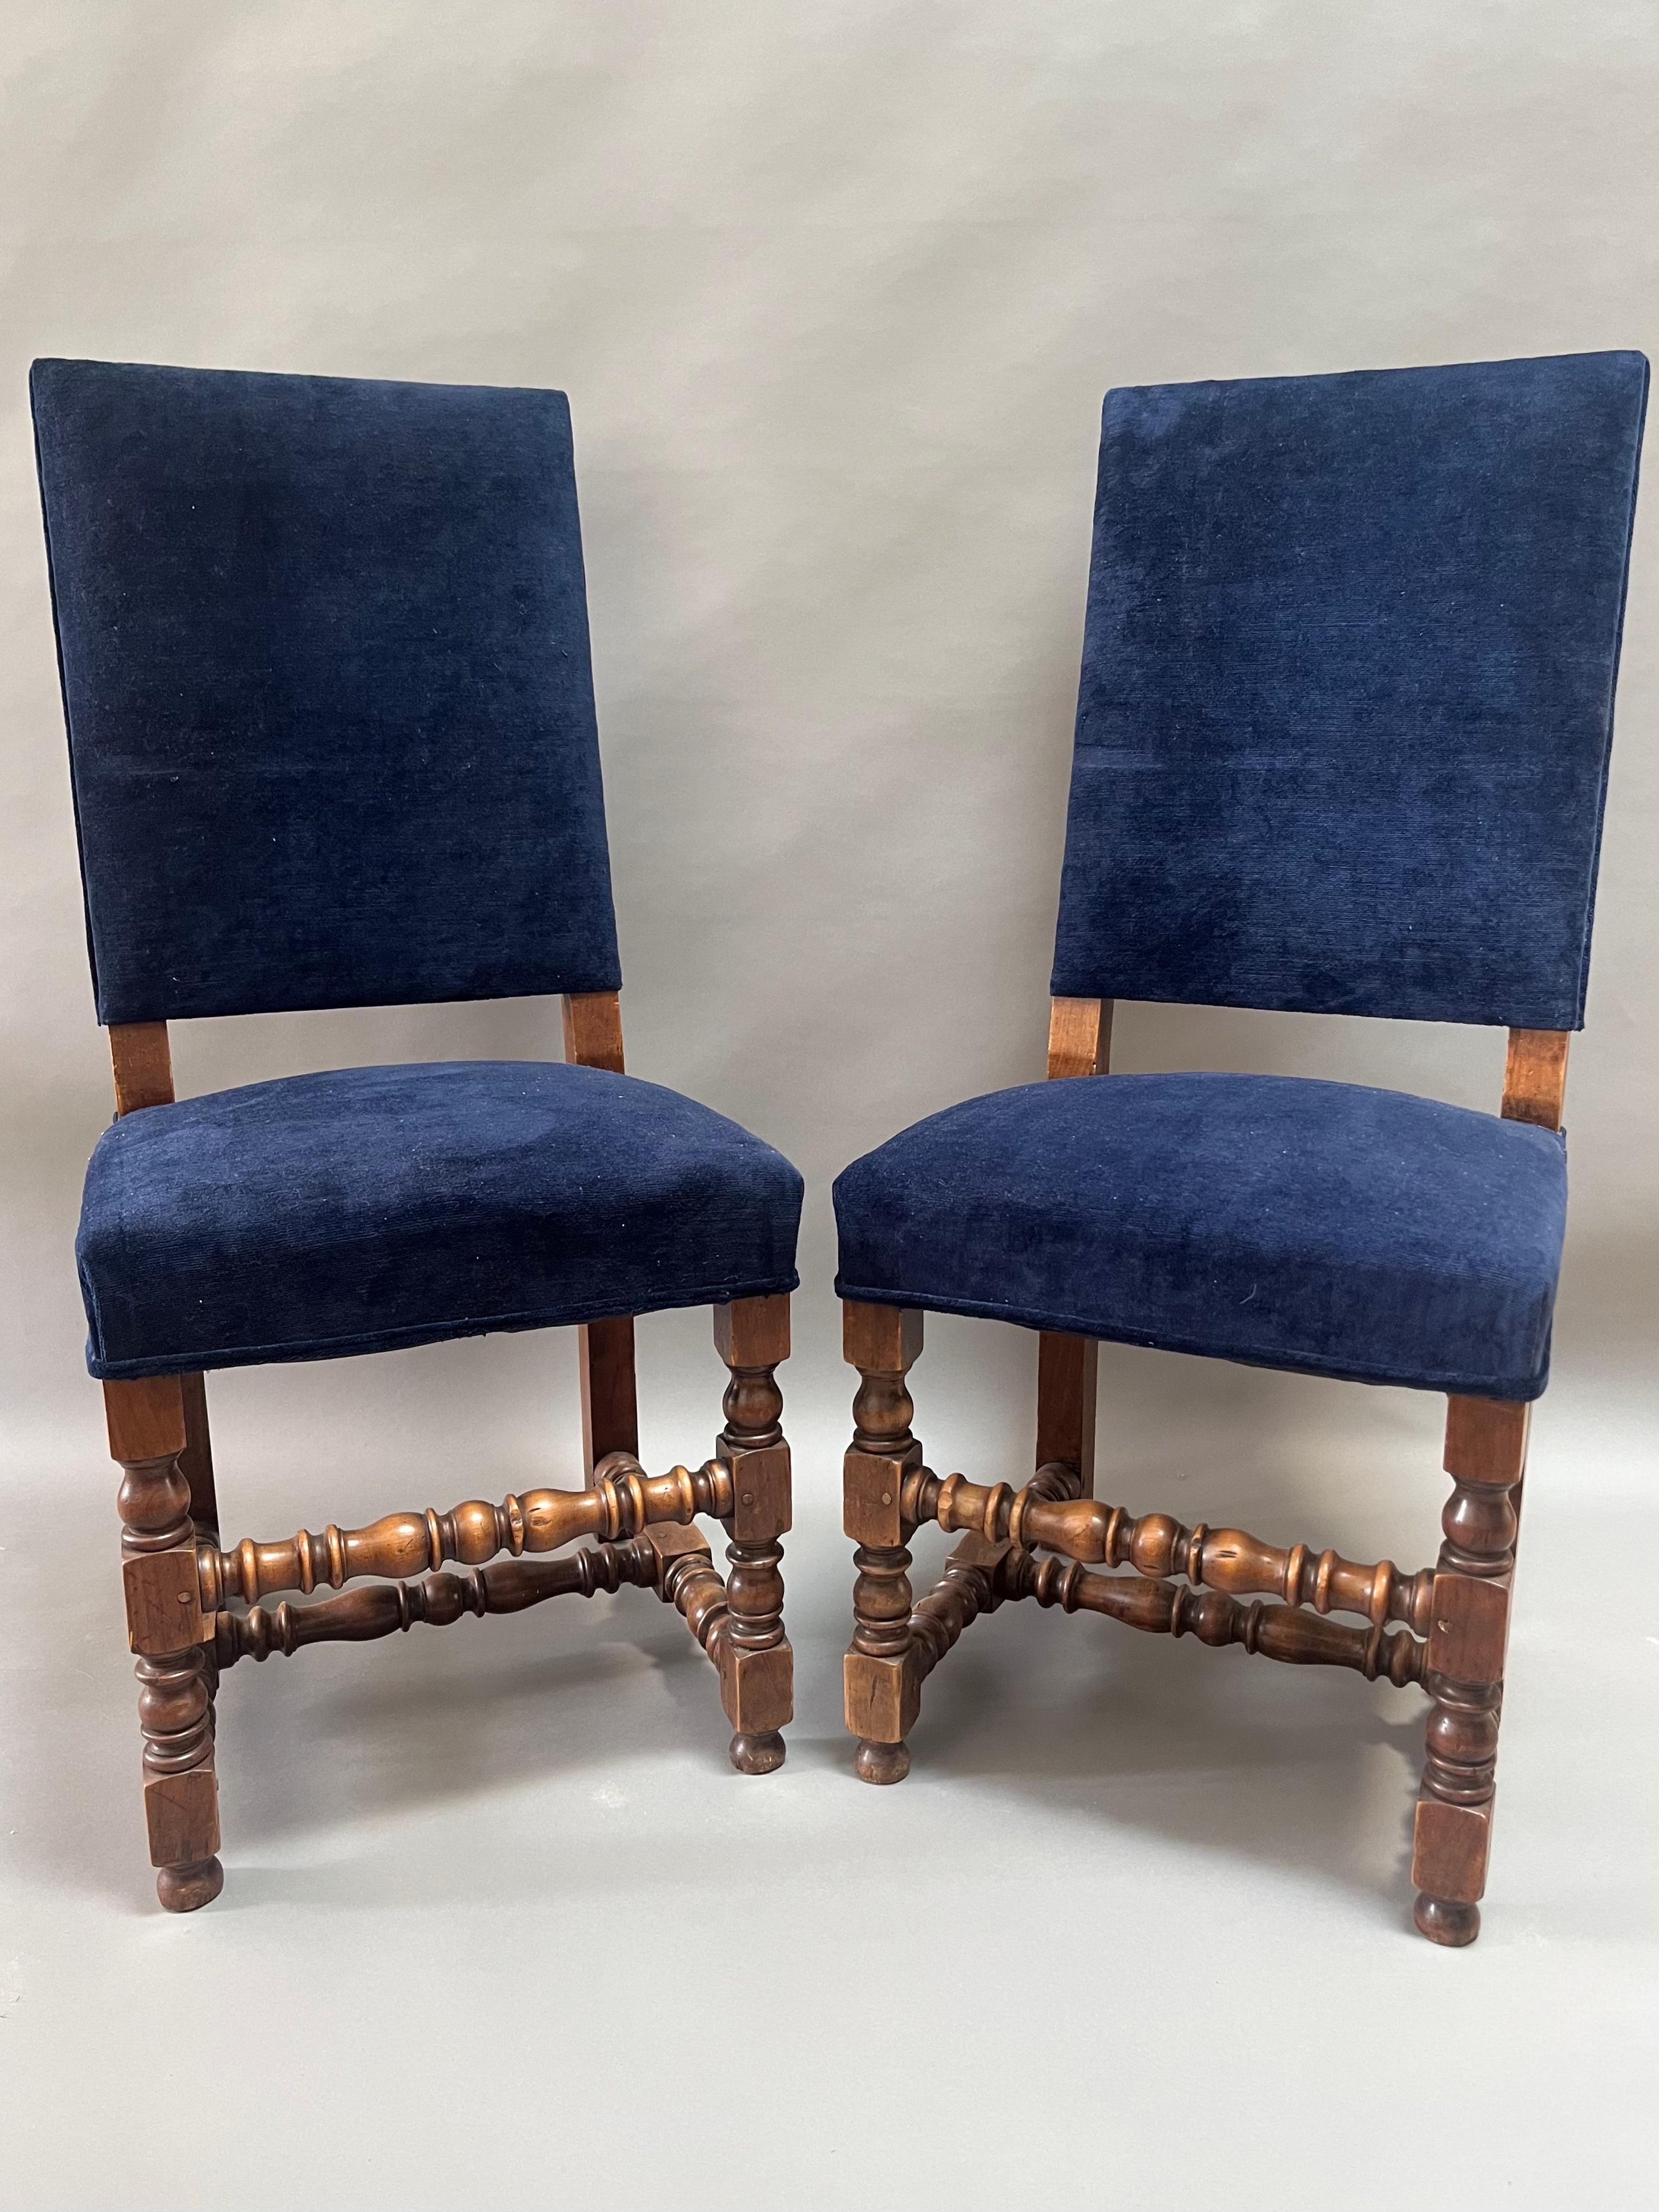  Extraordinary Pair of French Louis XIV  Period 17th Century Armchairs.   Made of Richly Patinated Circassian Walnut  with a deep lustrous color. Arched Backs over elegant carved sweeping arms  with beautiful turned uprights and stretchers 